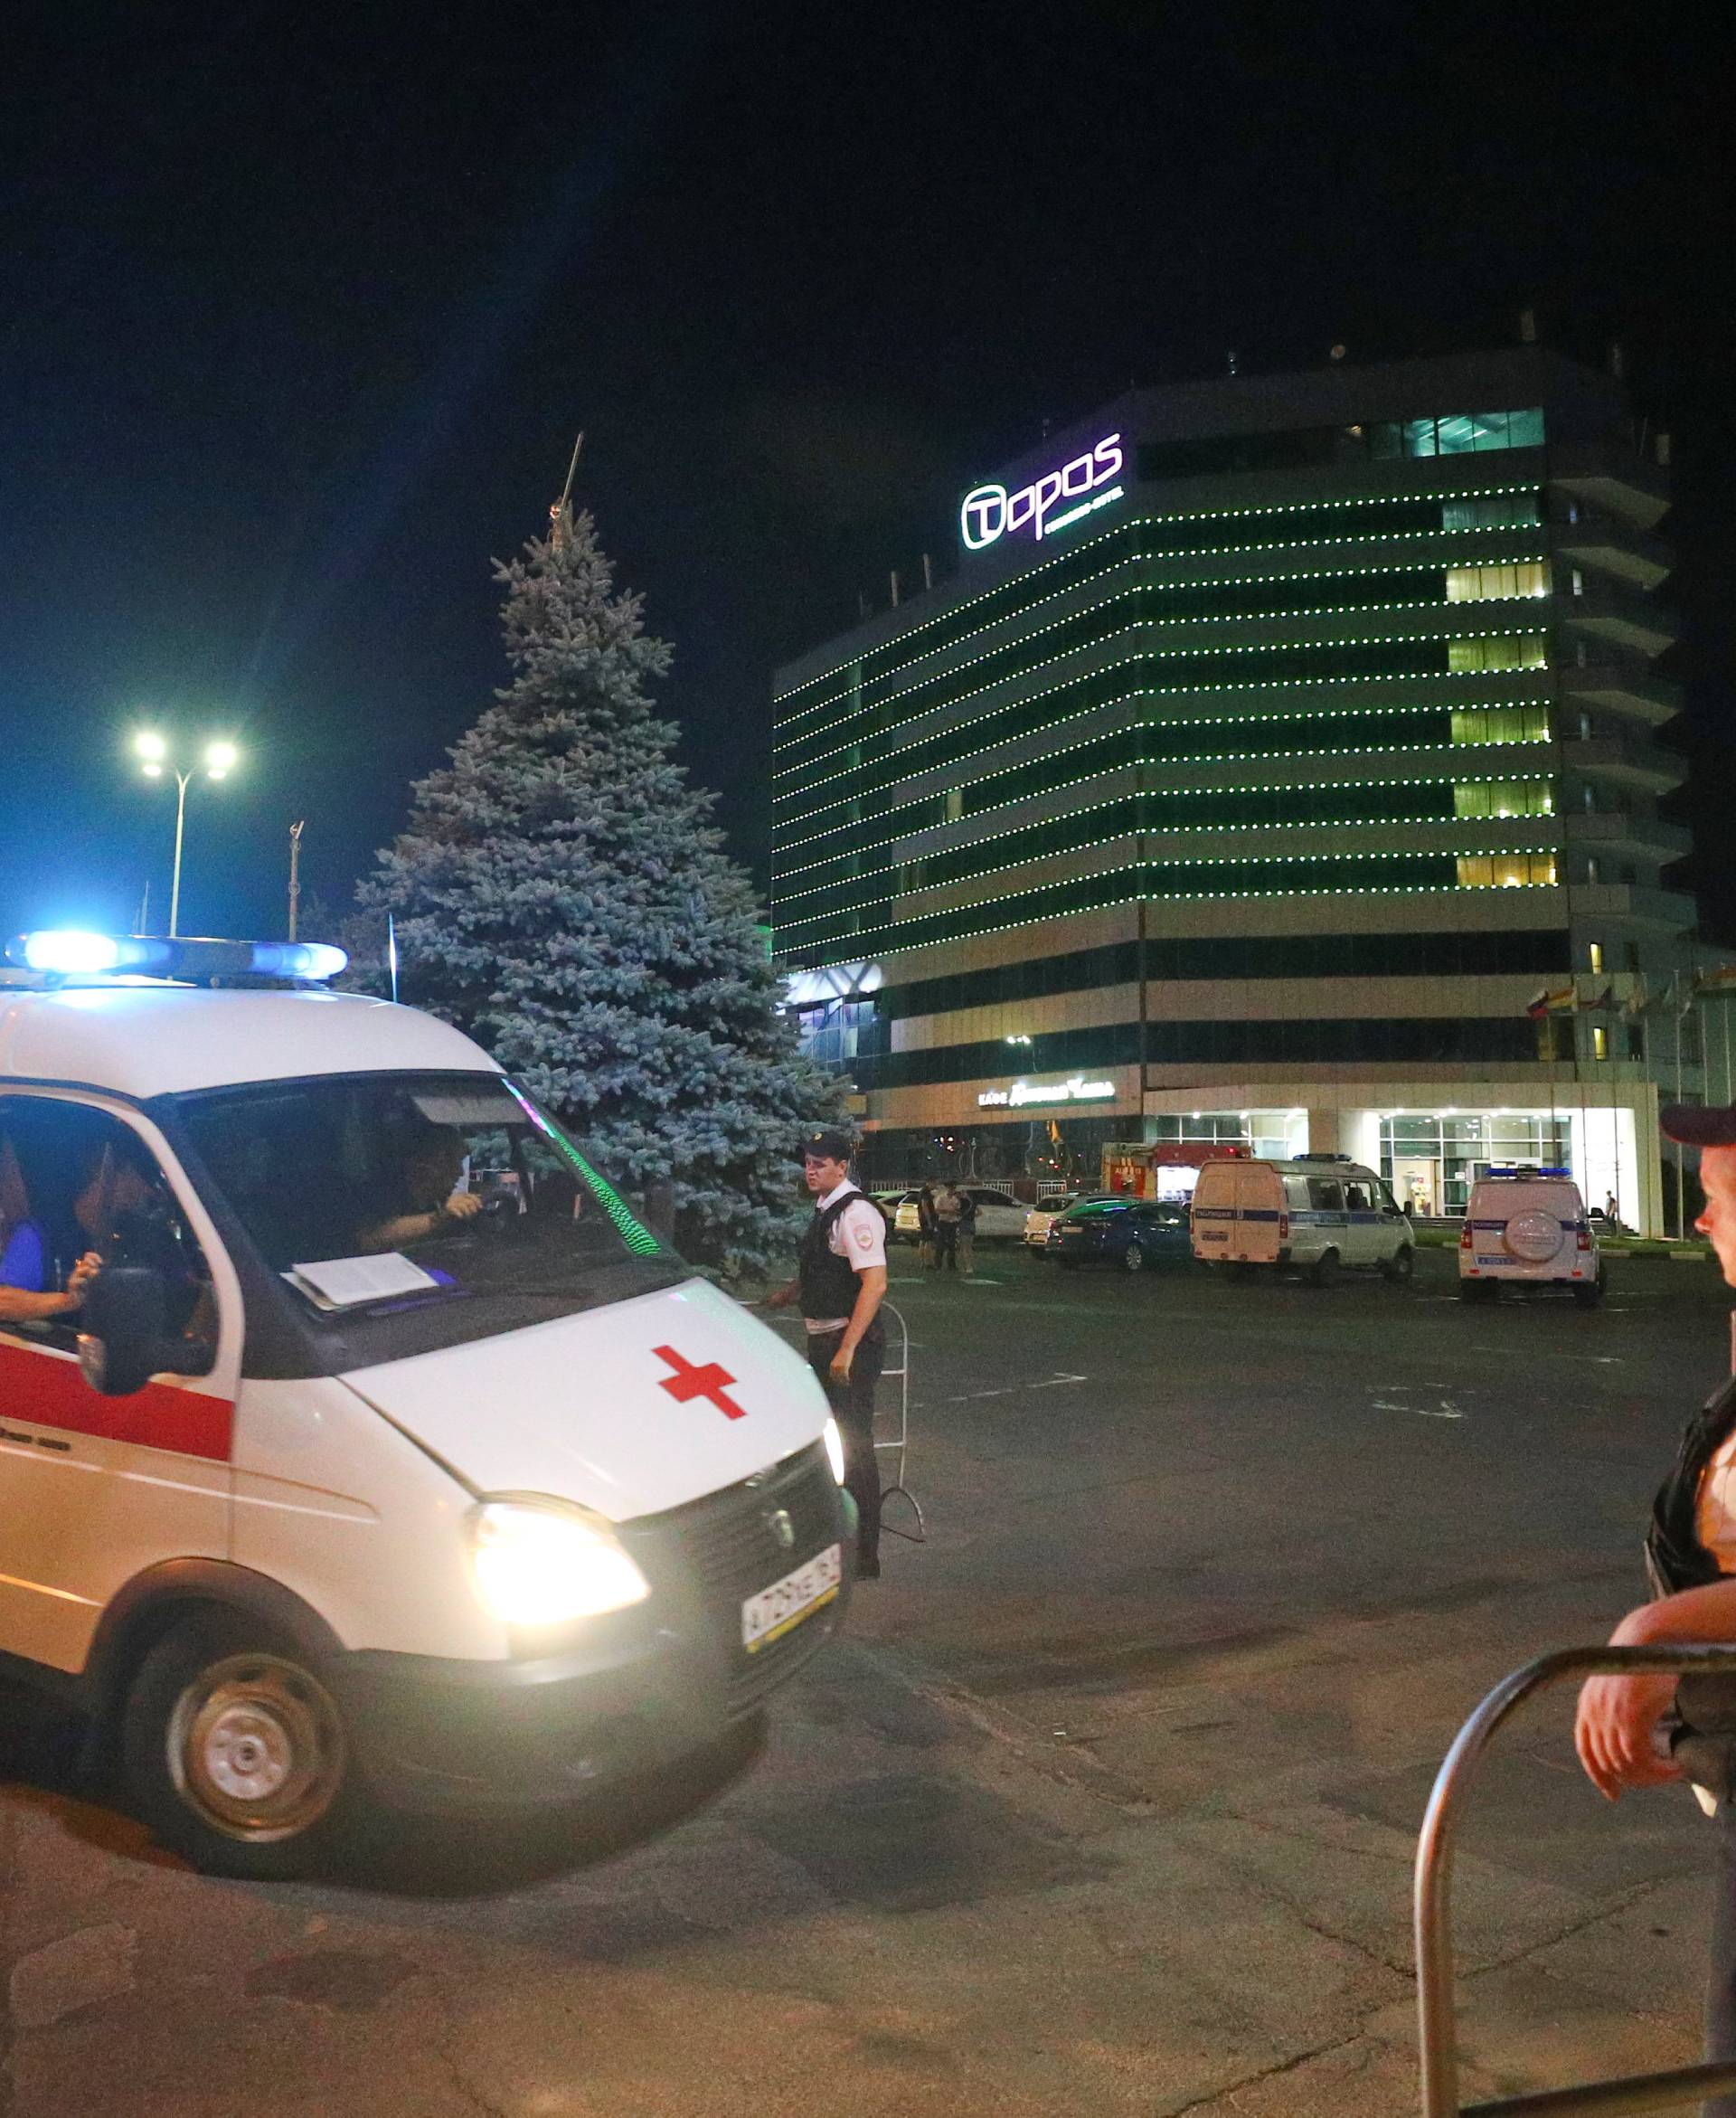 Ambulance arrives at the Topos Congress hotel in the soccer World Cup host city of Rostov-on-Don